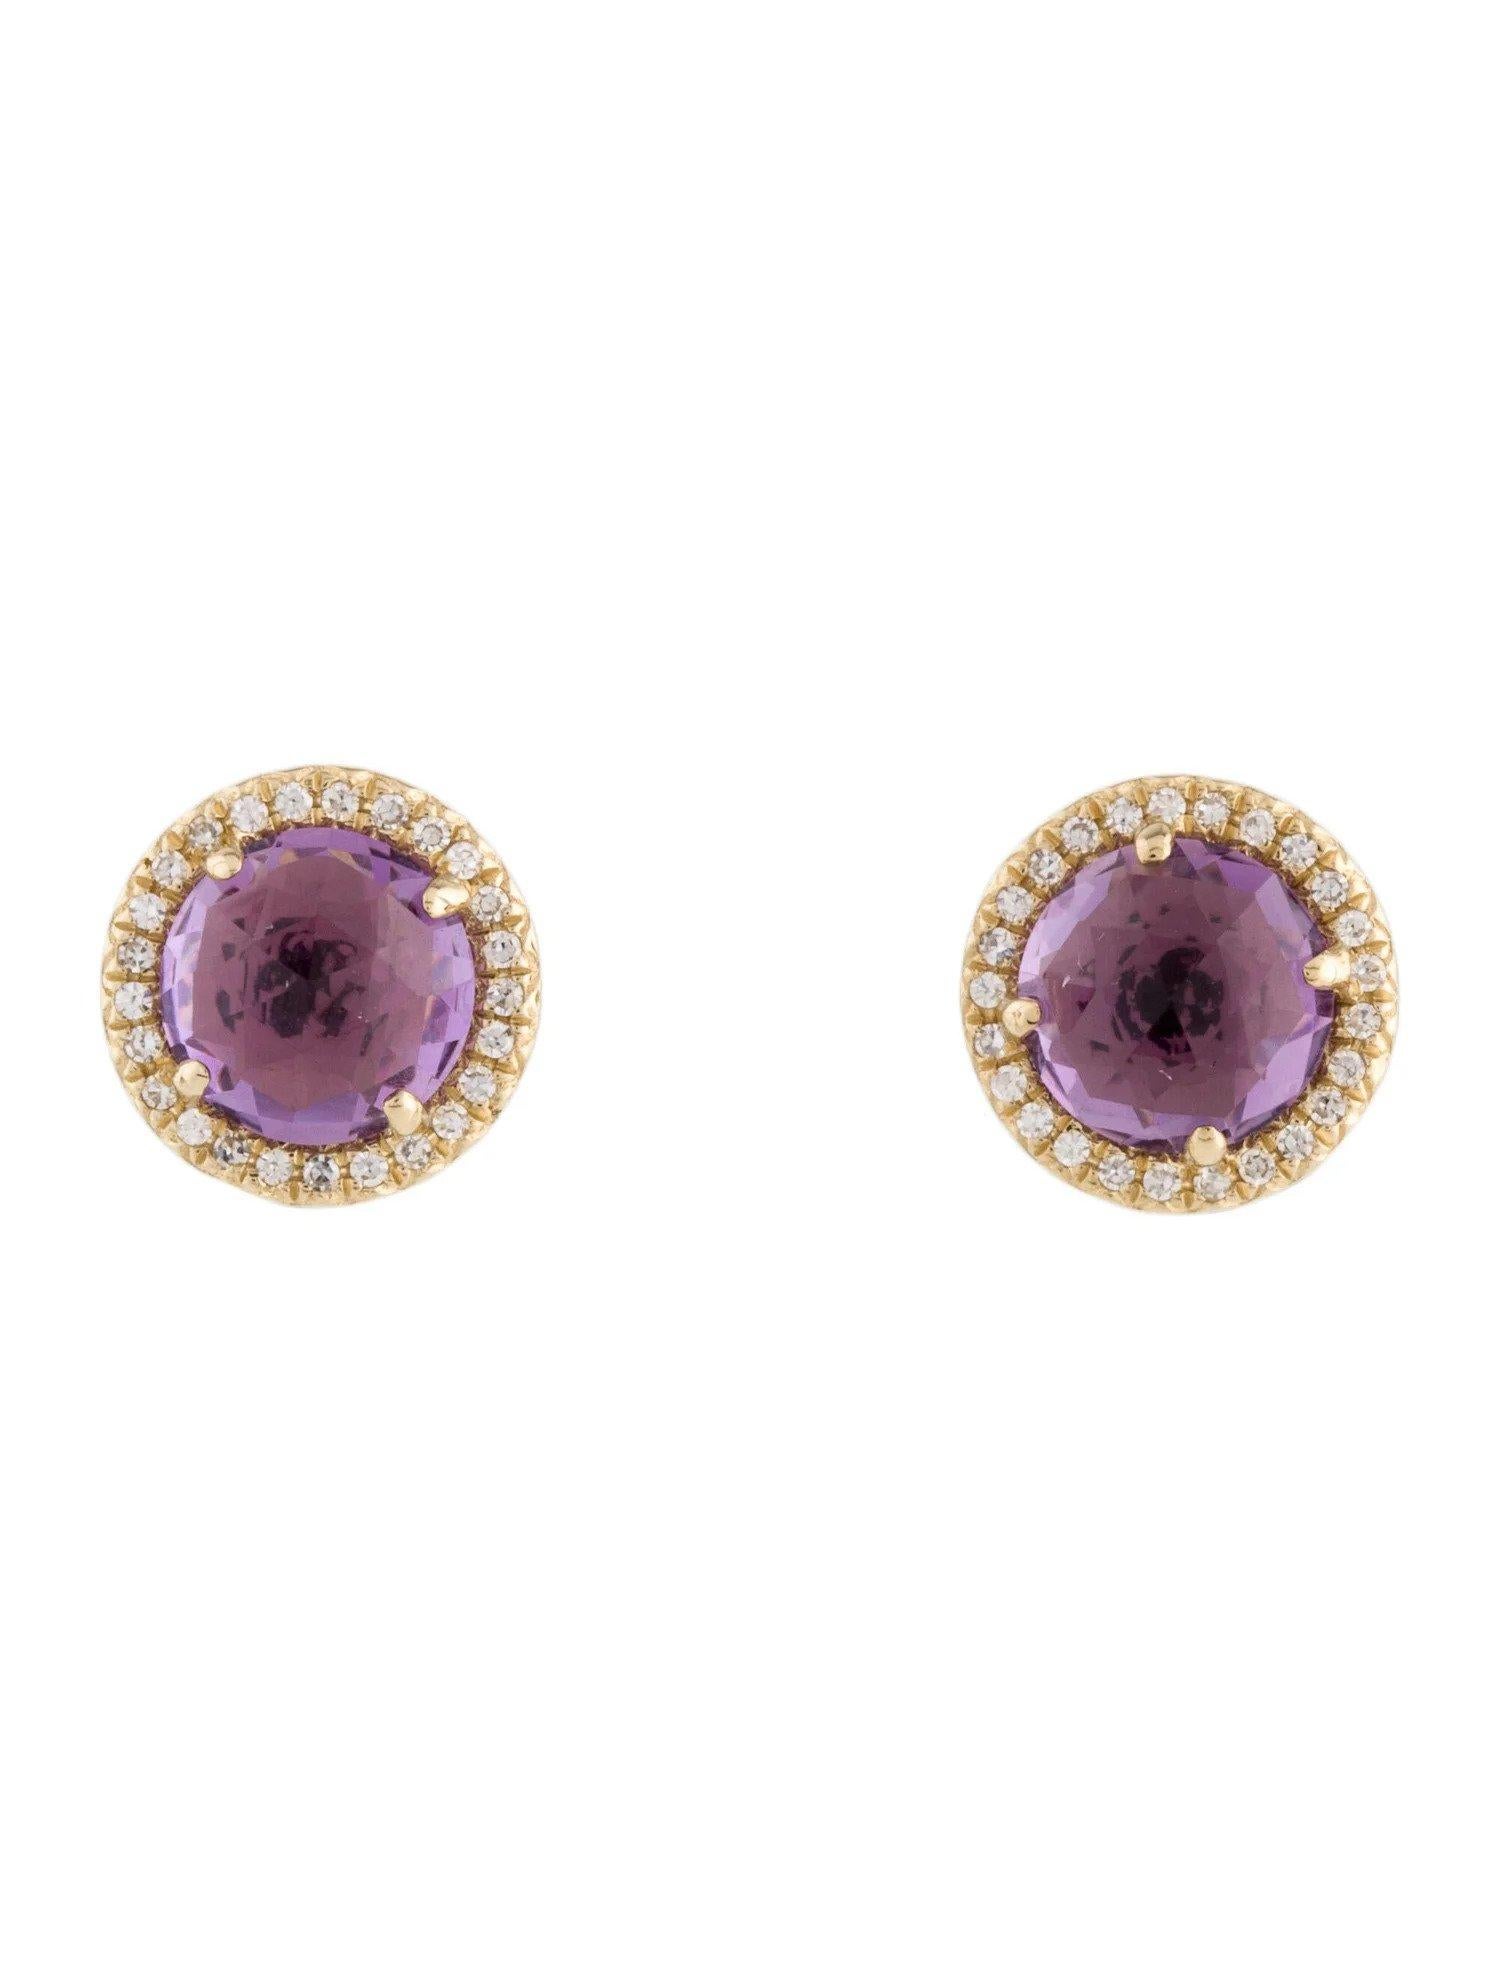 These Amethyst & Diamond Earrings are a stunning and timeless accessory that can add a touch of glamour and sophistication to any outfit. 

These earrings each feature a 0.93 Carat Round Purple Amethyst, with a Diamond Halo comprised of 0.06 Carats